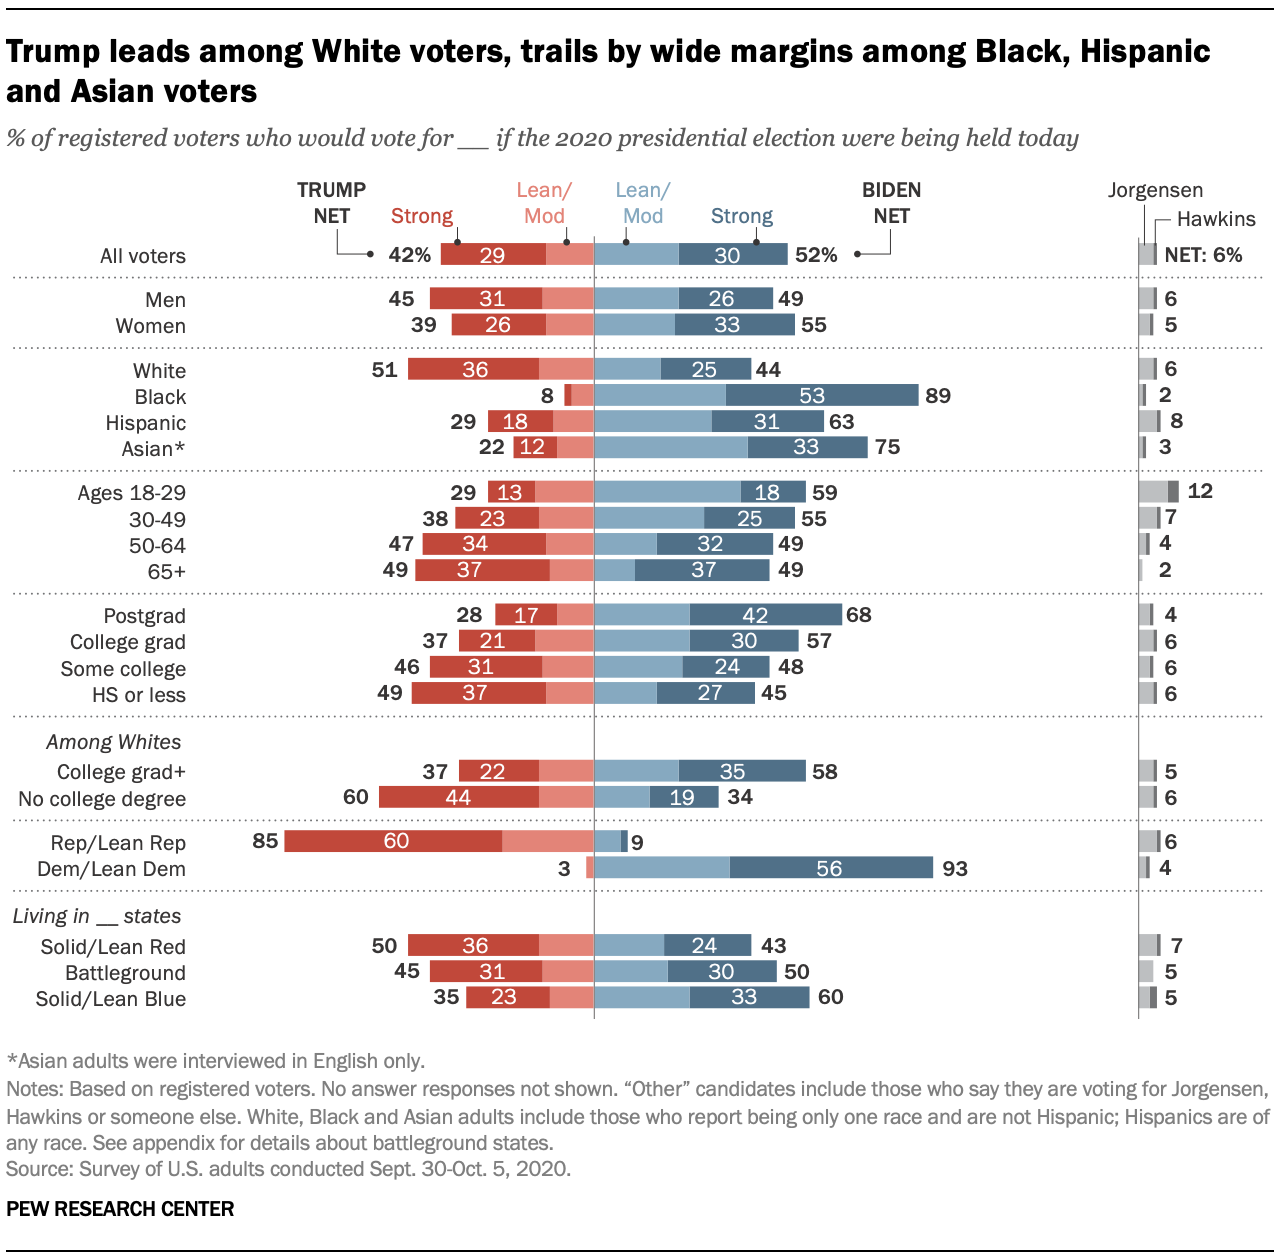 Trump leads among White voters, trails by wide margins among Black, Hispanic and Asian voters